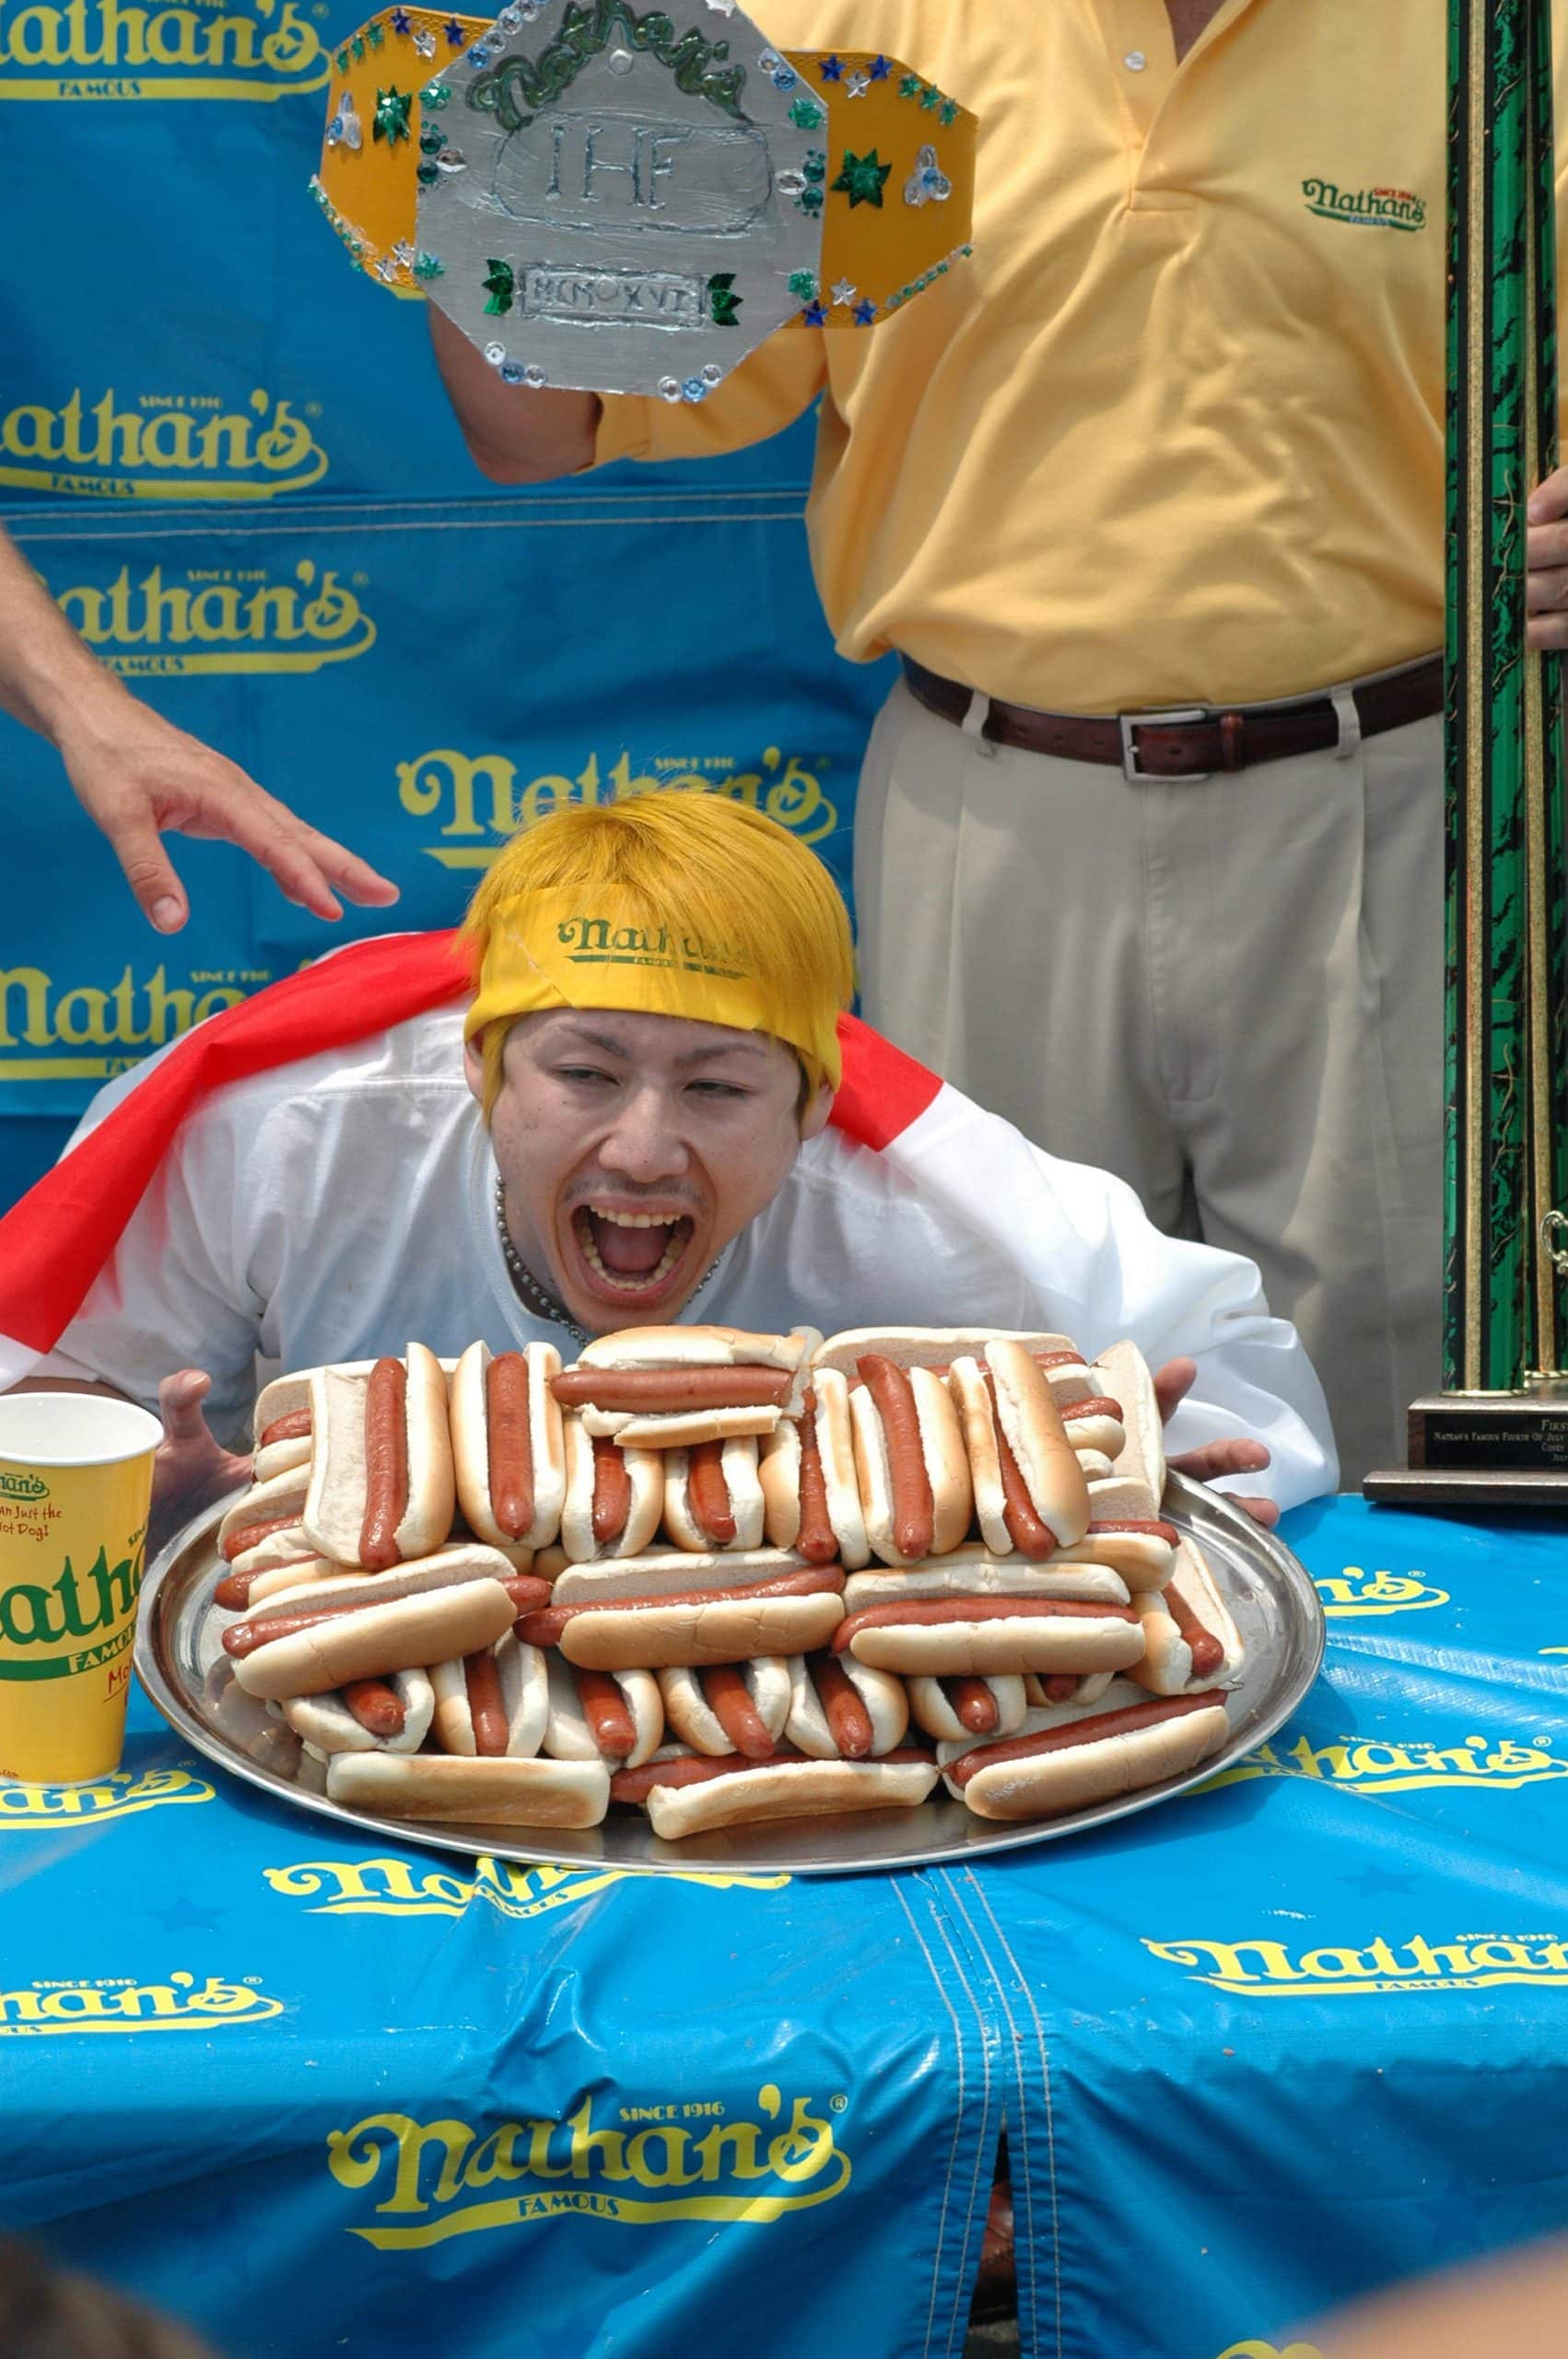 Takeru Kobayashi- Winner with 53 3/4 hot dogs eaten in 12 minutes (Photo by Bobby Bank/WireImage)